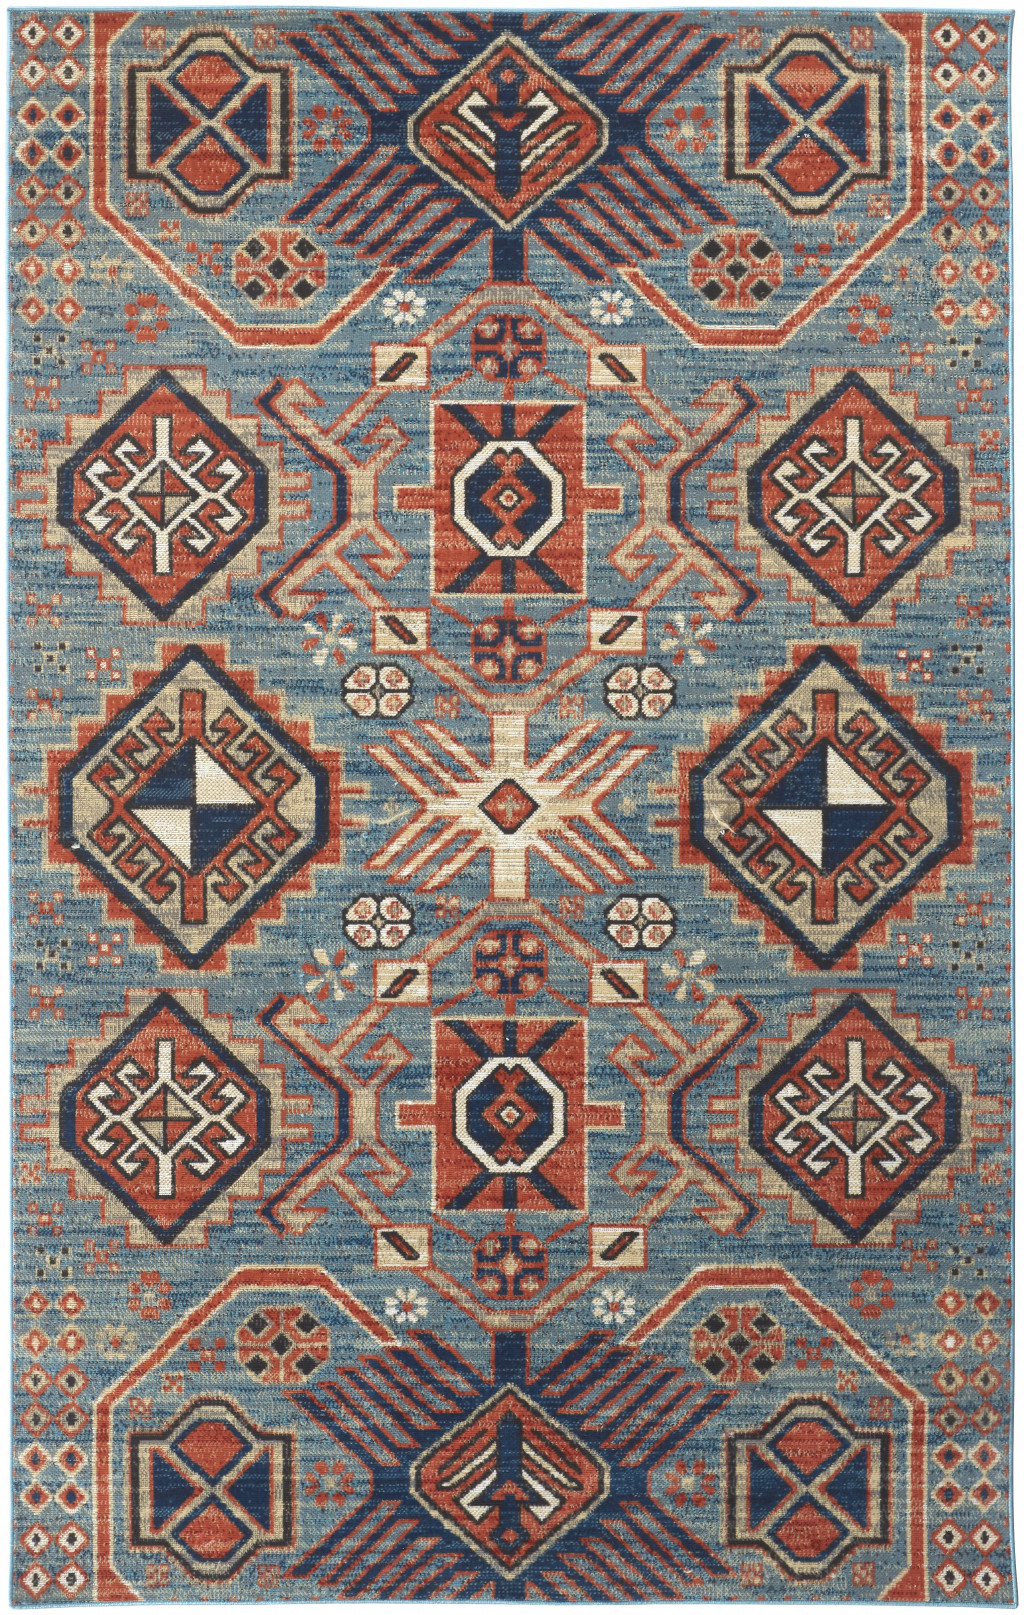 10' X 13' Blue Red And Tan Abstract Power Loom Distressed Stain Resistant Area Rug-514656-1